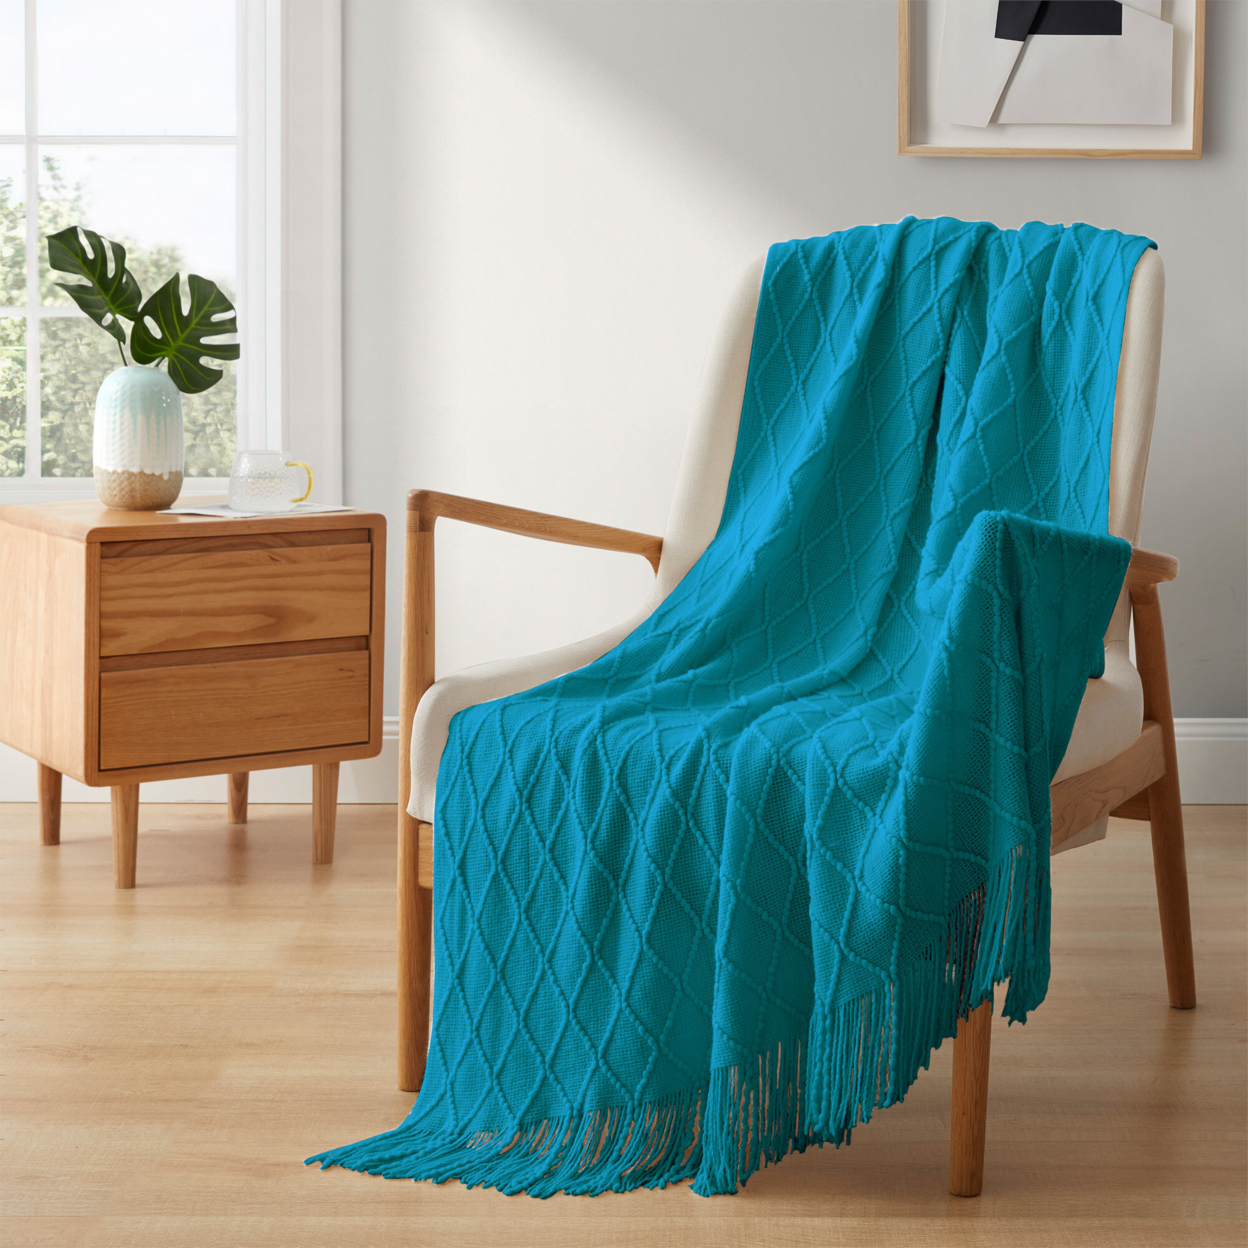 Ultra Soft Diamond Knit Throw Blanket 50x60-Perfect For Year-round Comfort - Navy Blue, 50 In X 60 In